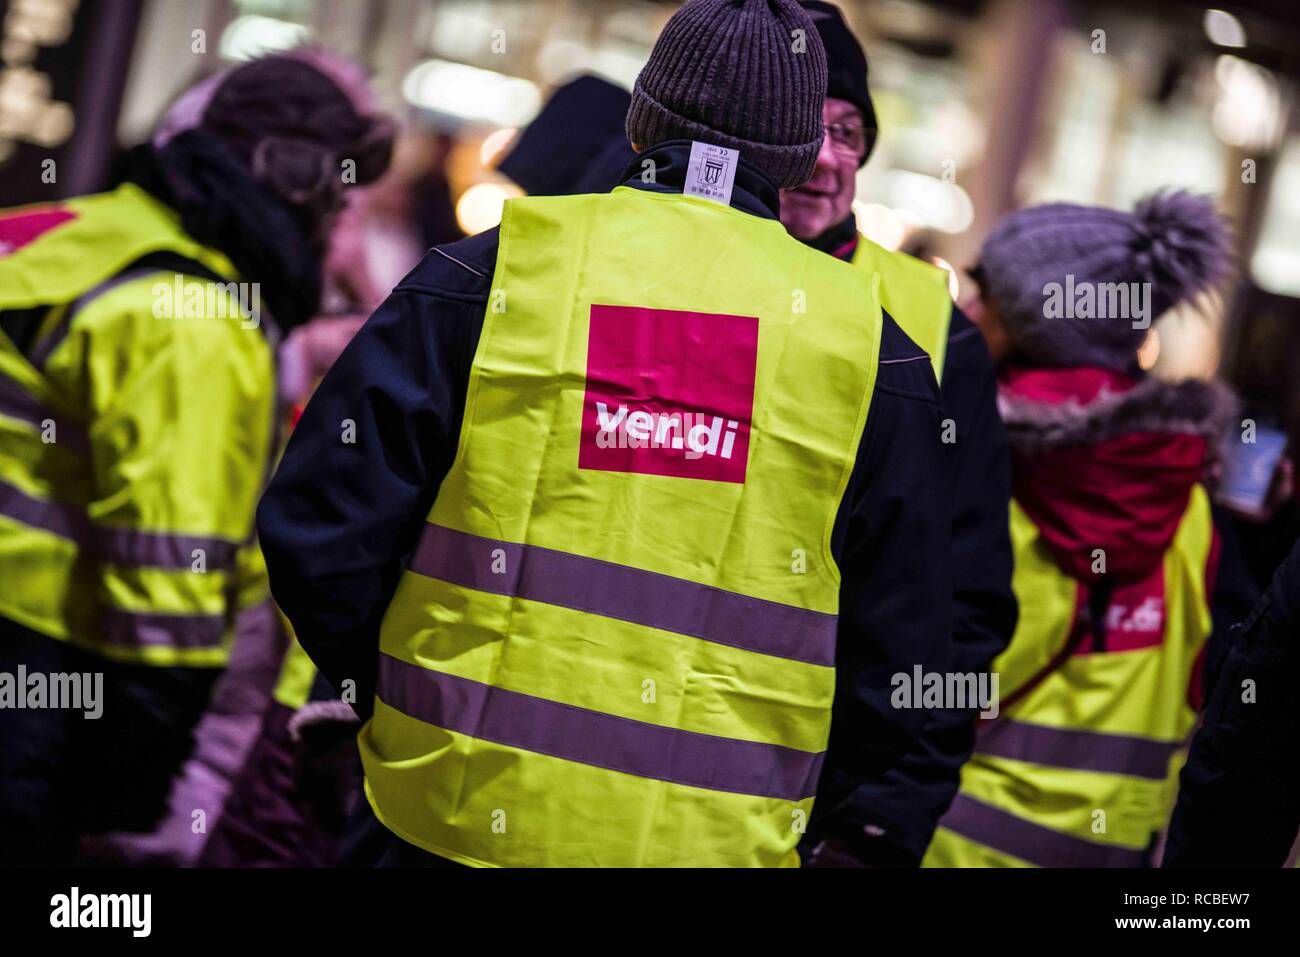 Munich, Bavaria, Germany. 15th Jan, 2019. The logo of the Verdi union worn by a striking security worker at Munich International Airport. Citing a breakdown in talks with employers on December 21st, the German Ver.di union organized the latest warning strike in a series at the Munich International Airport with members employed in Airport Security Services (Luftsicherheit) walking out from 3:30am to 24:00. The union is demanding 20 Euros per hour for their 1,000 total members working in Passenger-, Freight, Personnel, and Goods Control of Airport Security, along with recertification to br Stock Photo